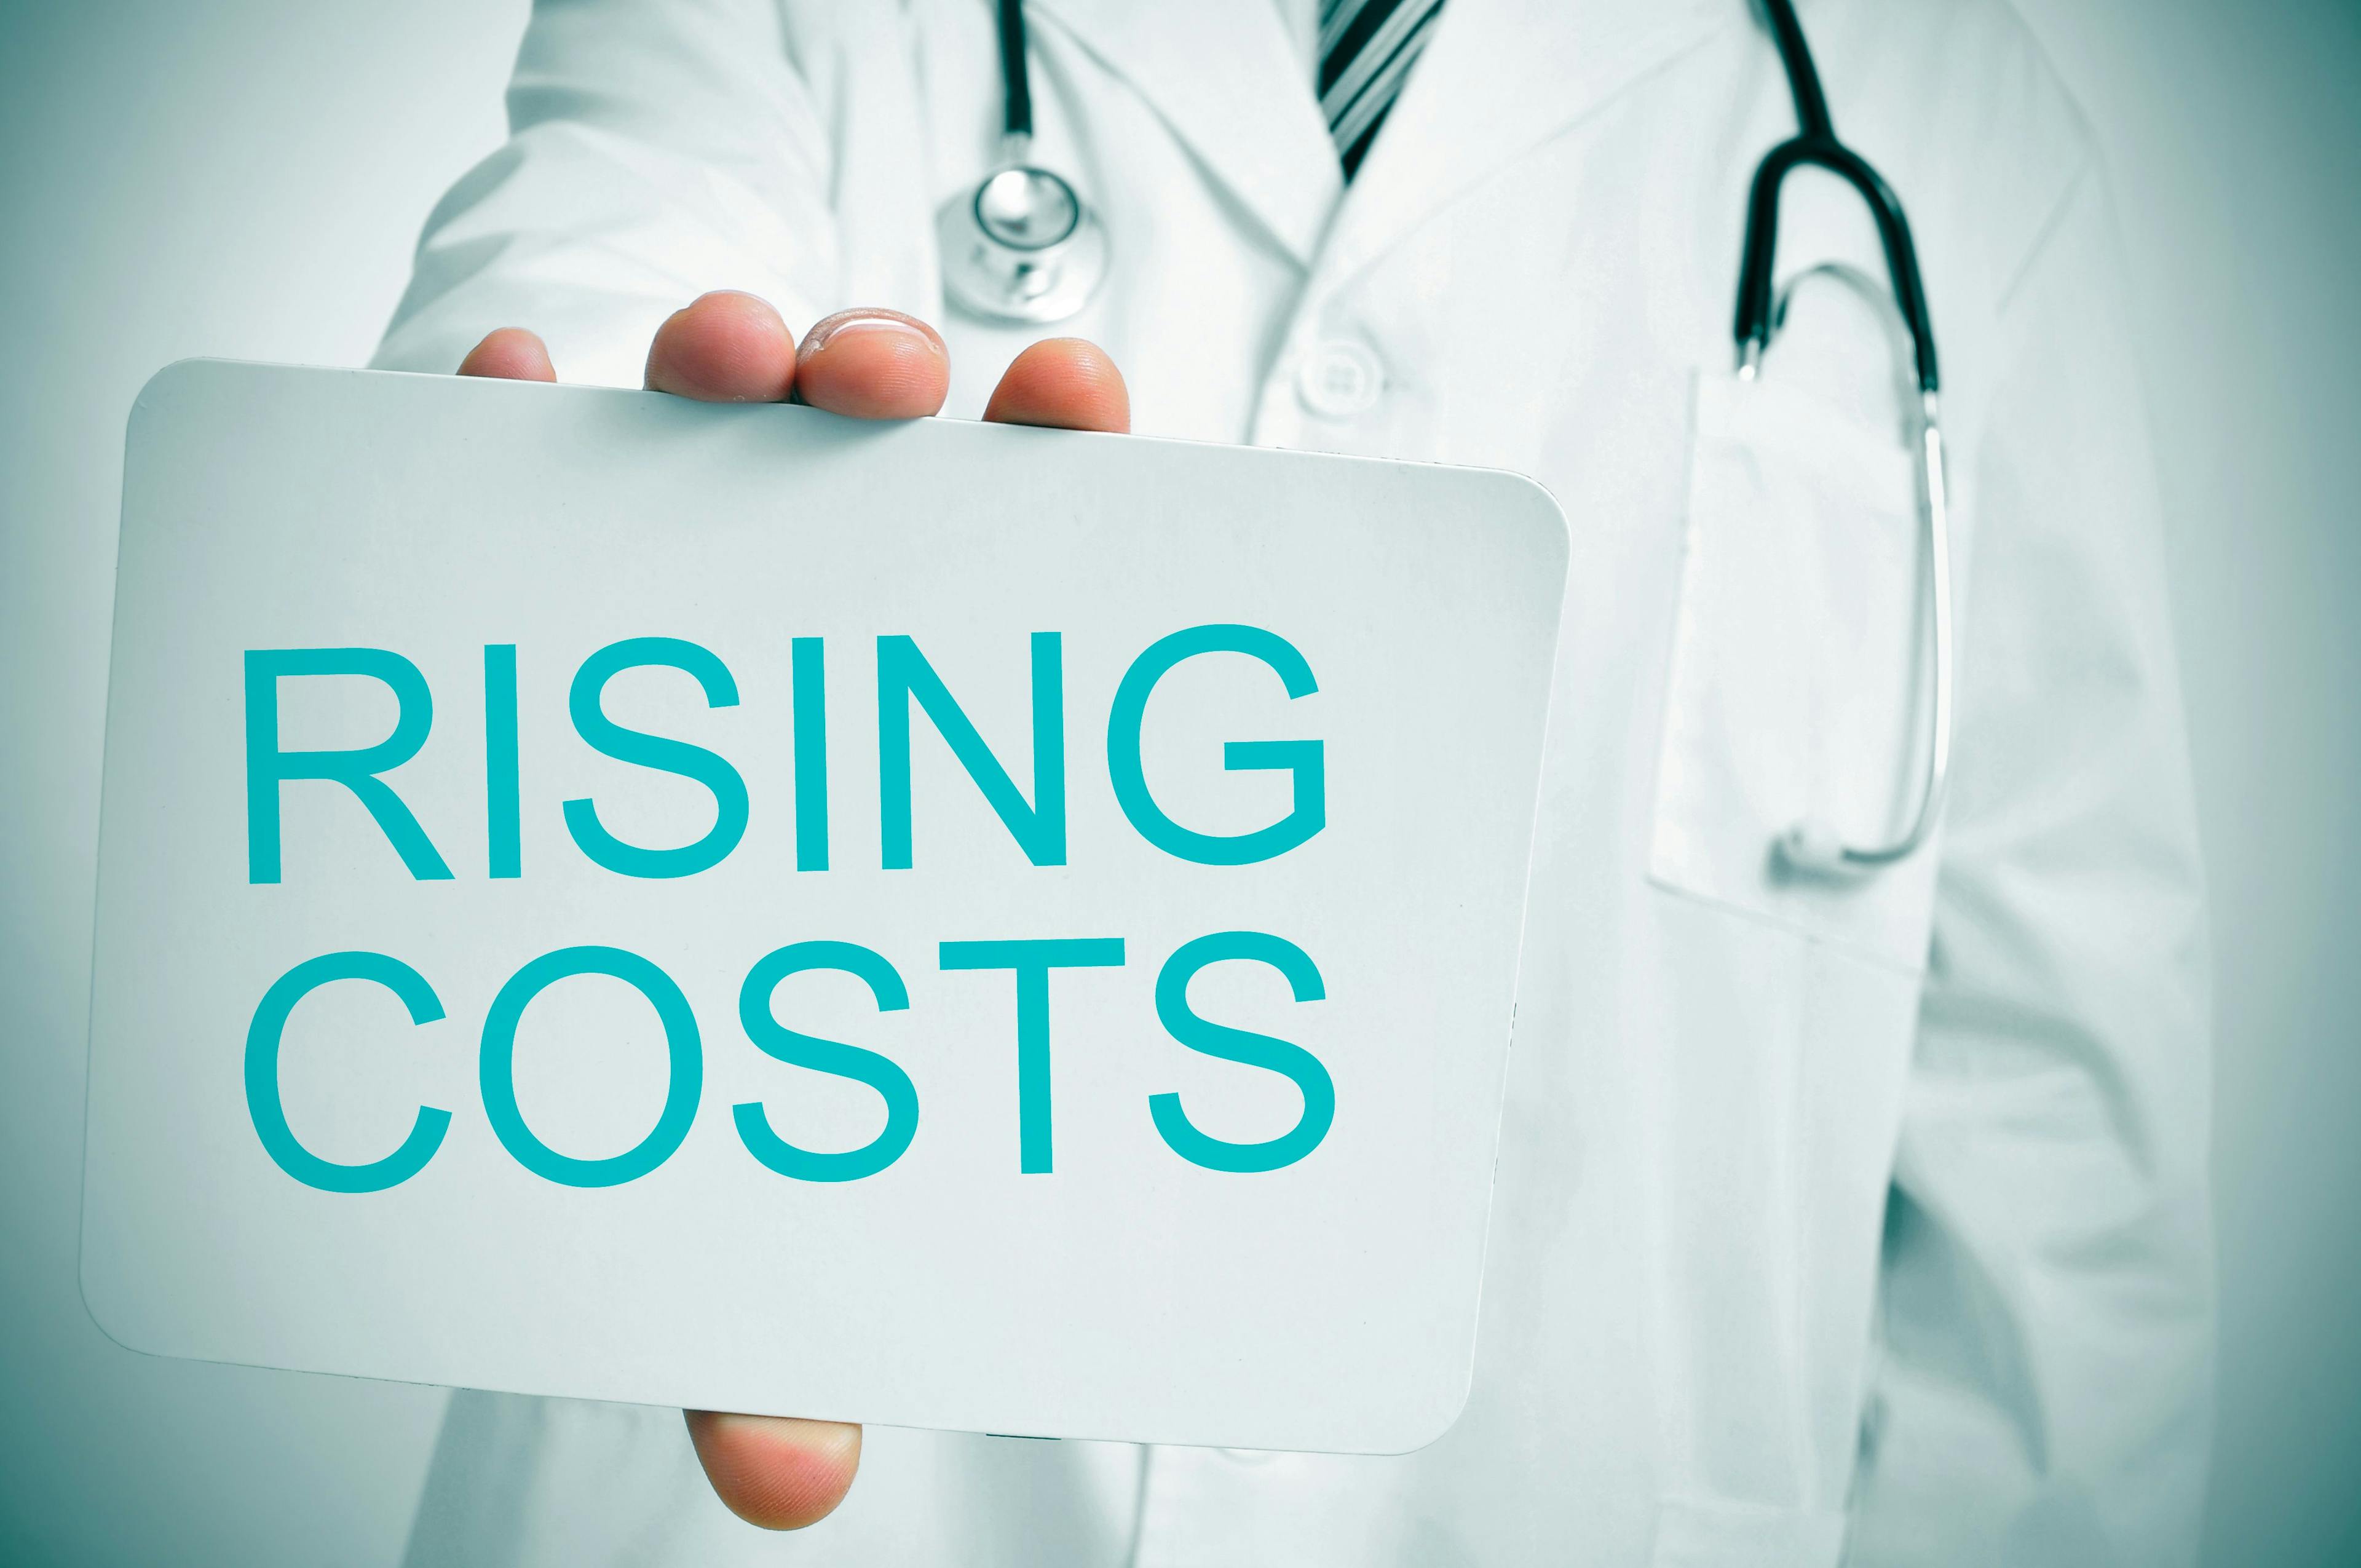 doctor holding "rising costs" sign ©nito-stock.adobe.com